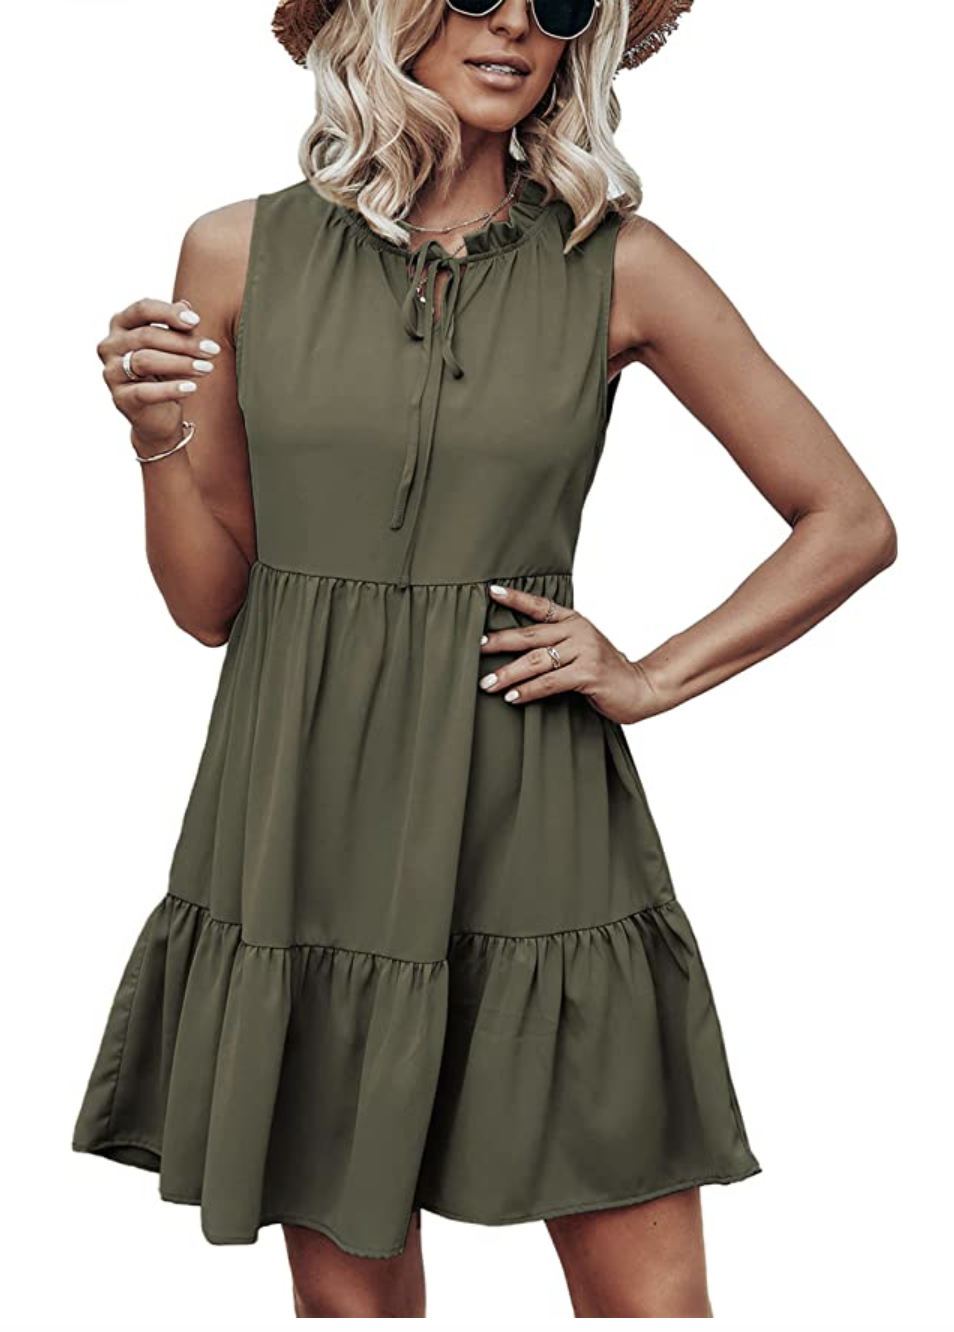 https://hips.hearstapps.com/vader-prod.s3.amazonaws.com/1653061129-summer-dresses-swing-dress-1653061100.png?crop=1xw:1xh;center,top&resize=980:*